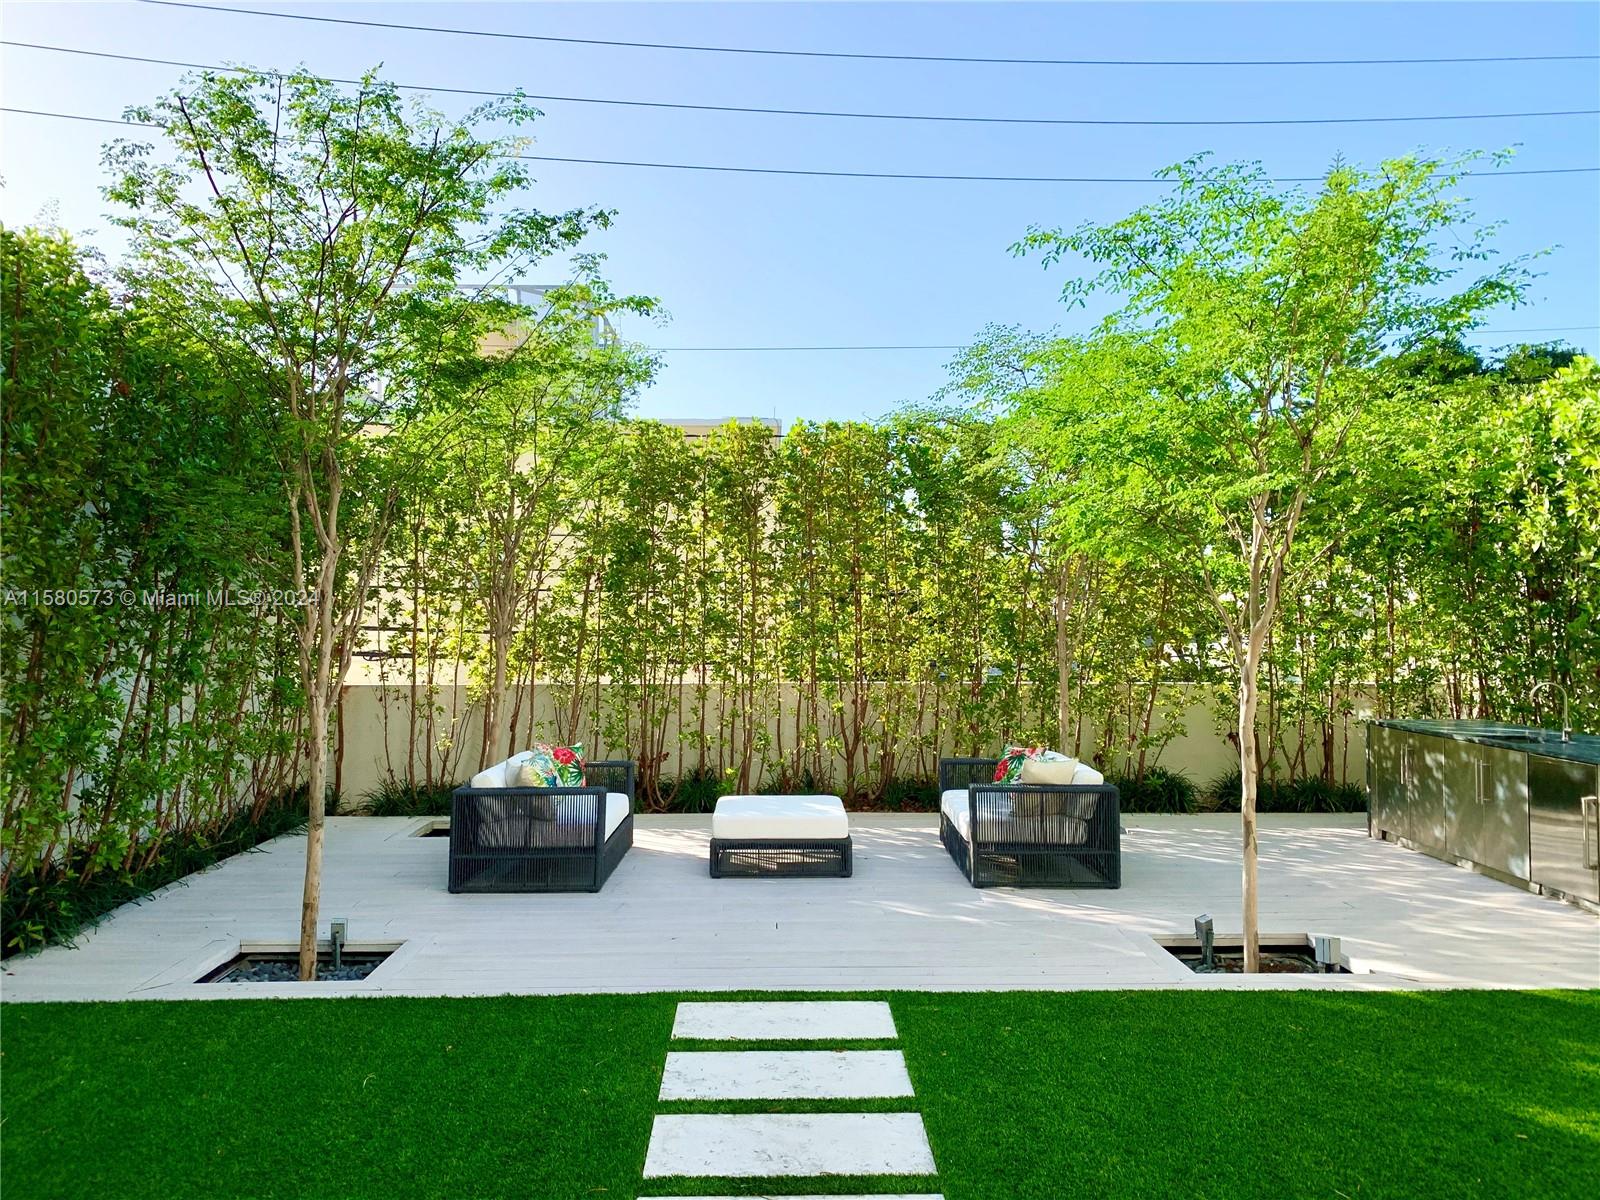 a view of a patio with couches plants and large trees